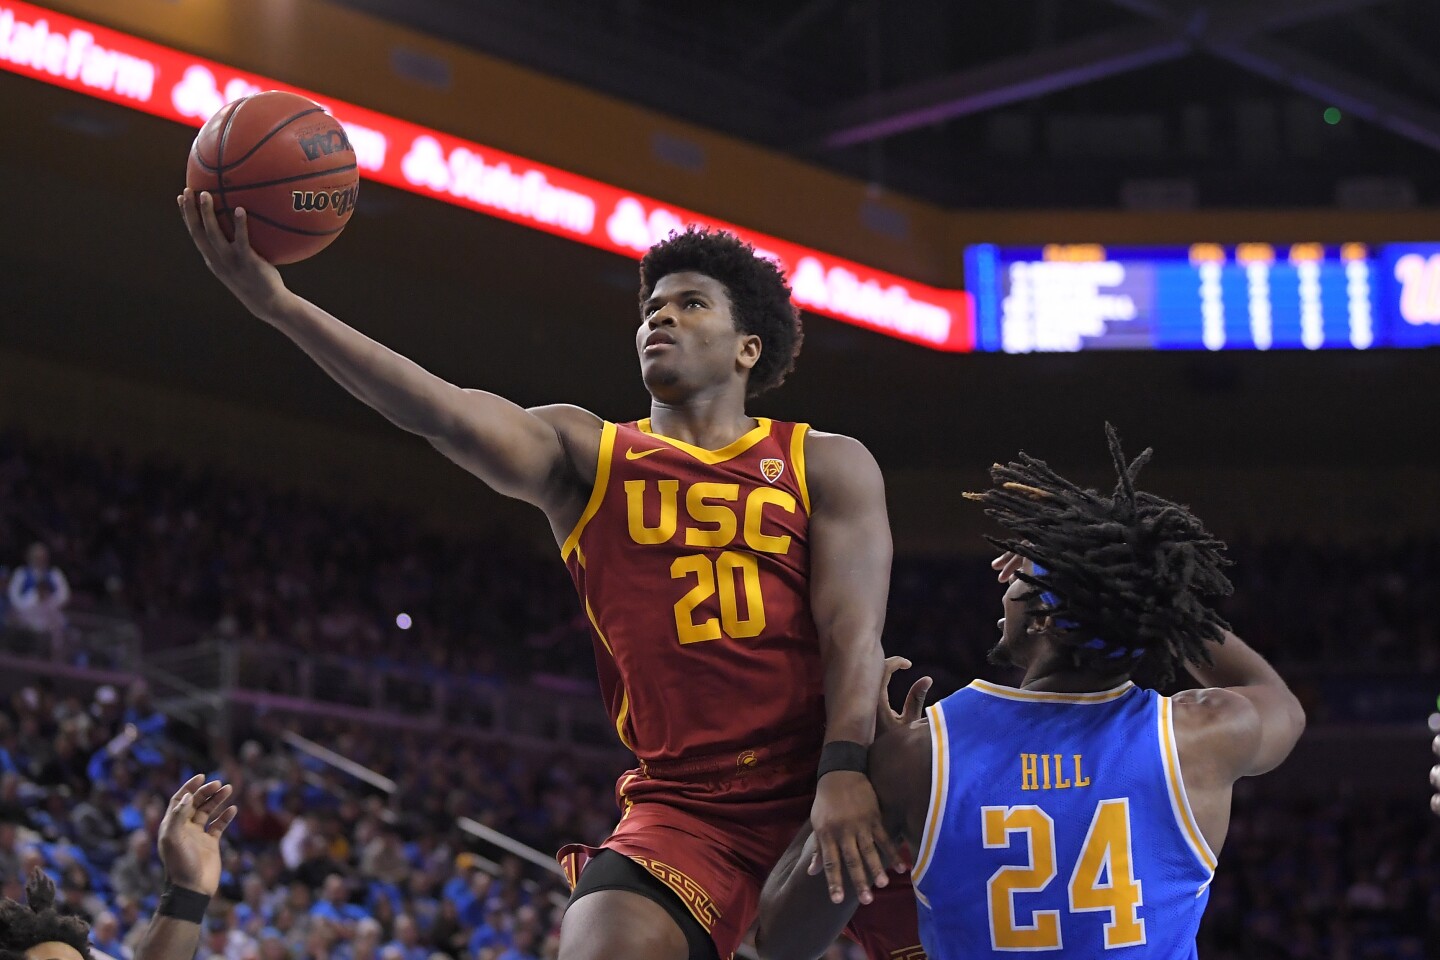 Southern California guard Ethan Anderson, left, shoots as UCLA forward Jalen Hill defends during the first half of an NCAA college basketball game Saturday, Jan. 11, 2020, in Los Angeles. (AP Photo/Mark J. Terrill)